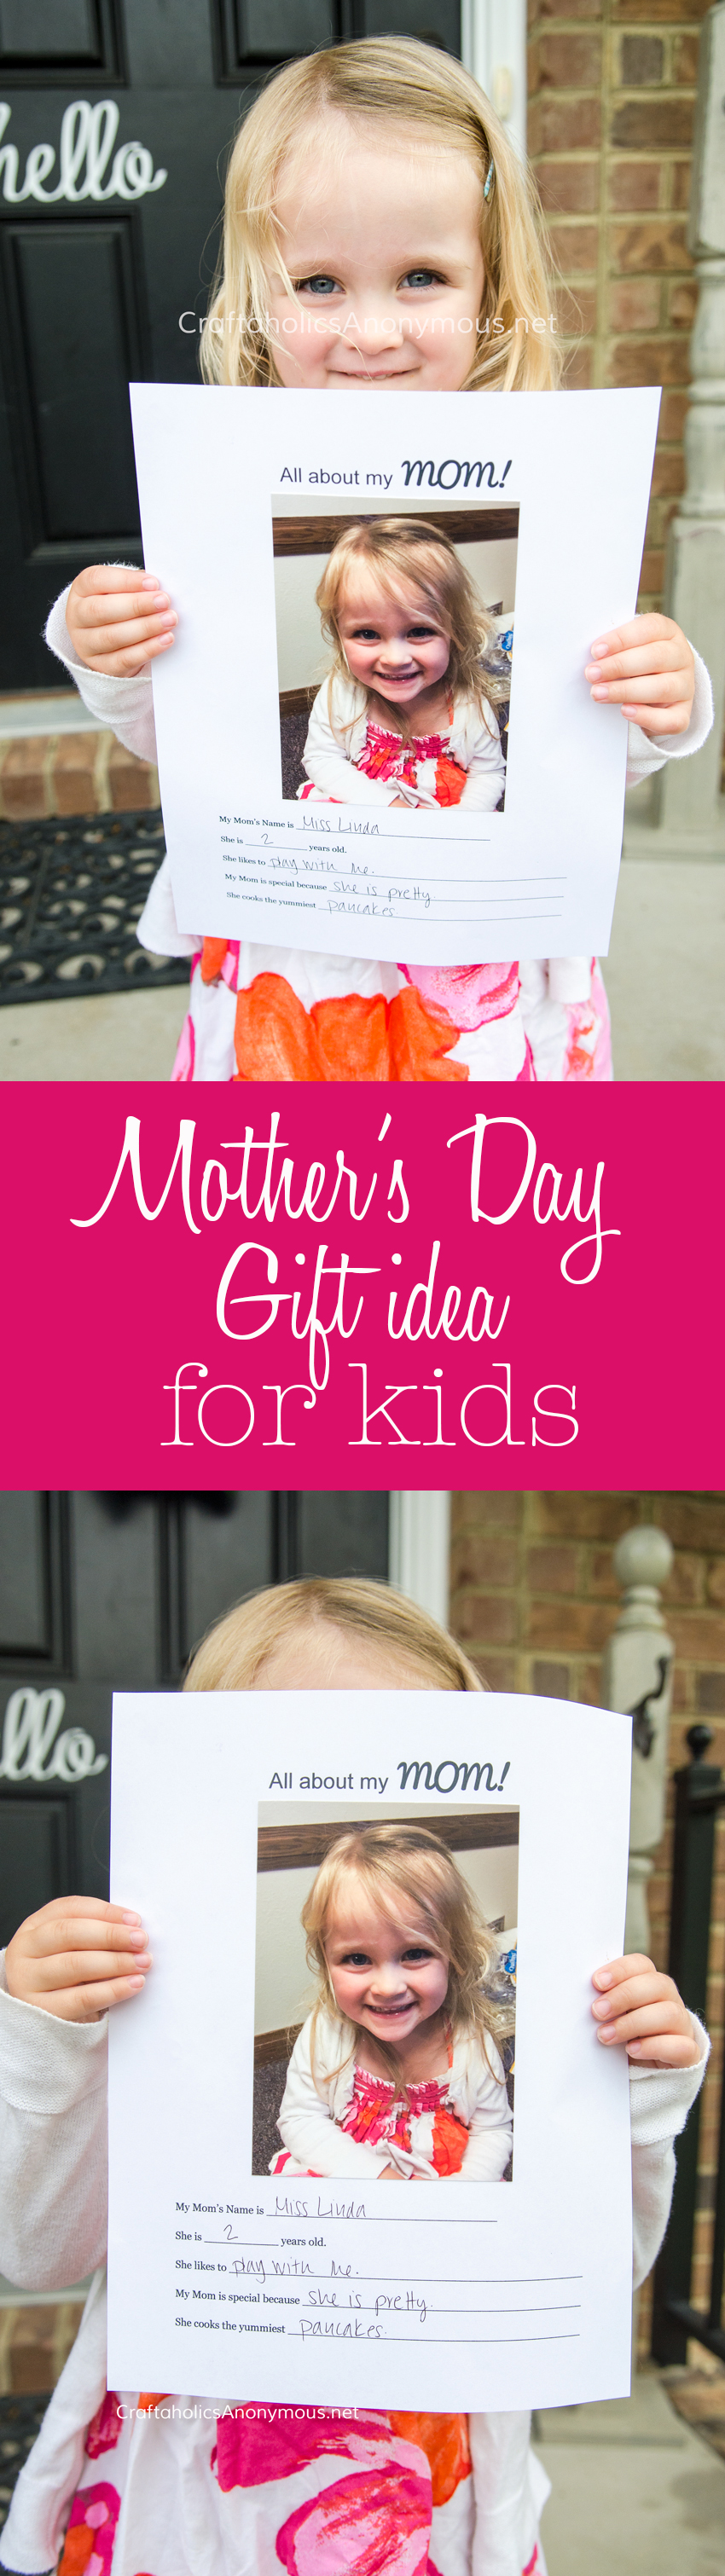 Mother's-Day-gift-idea-for-kids